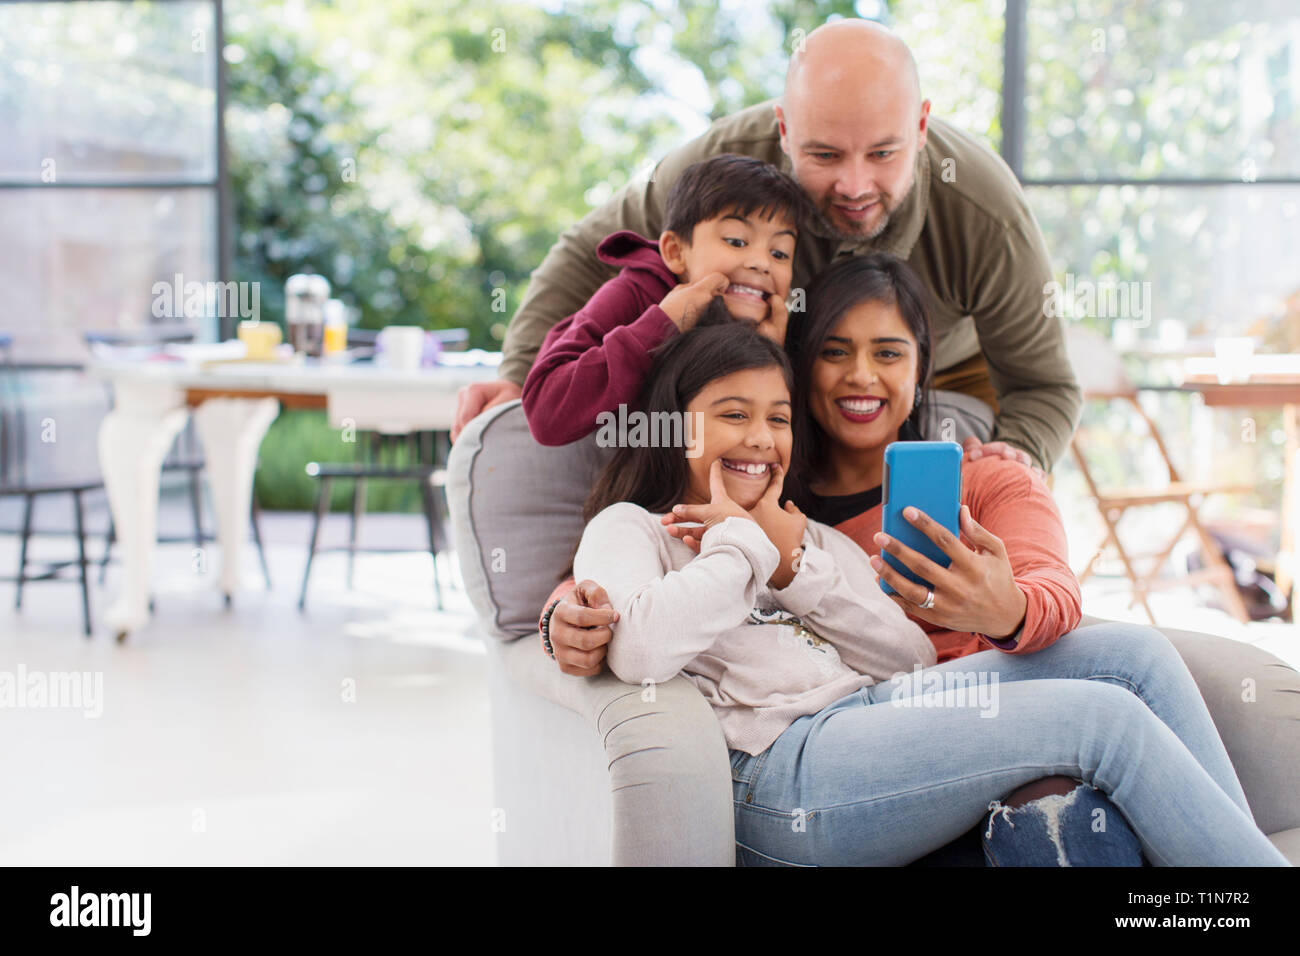 Playful family taking selfie with camera phone Stock Photo